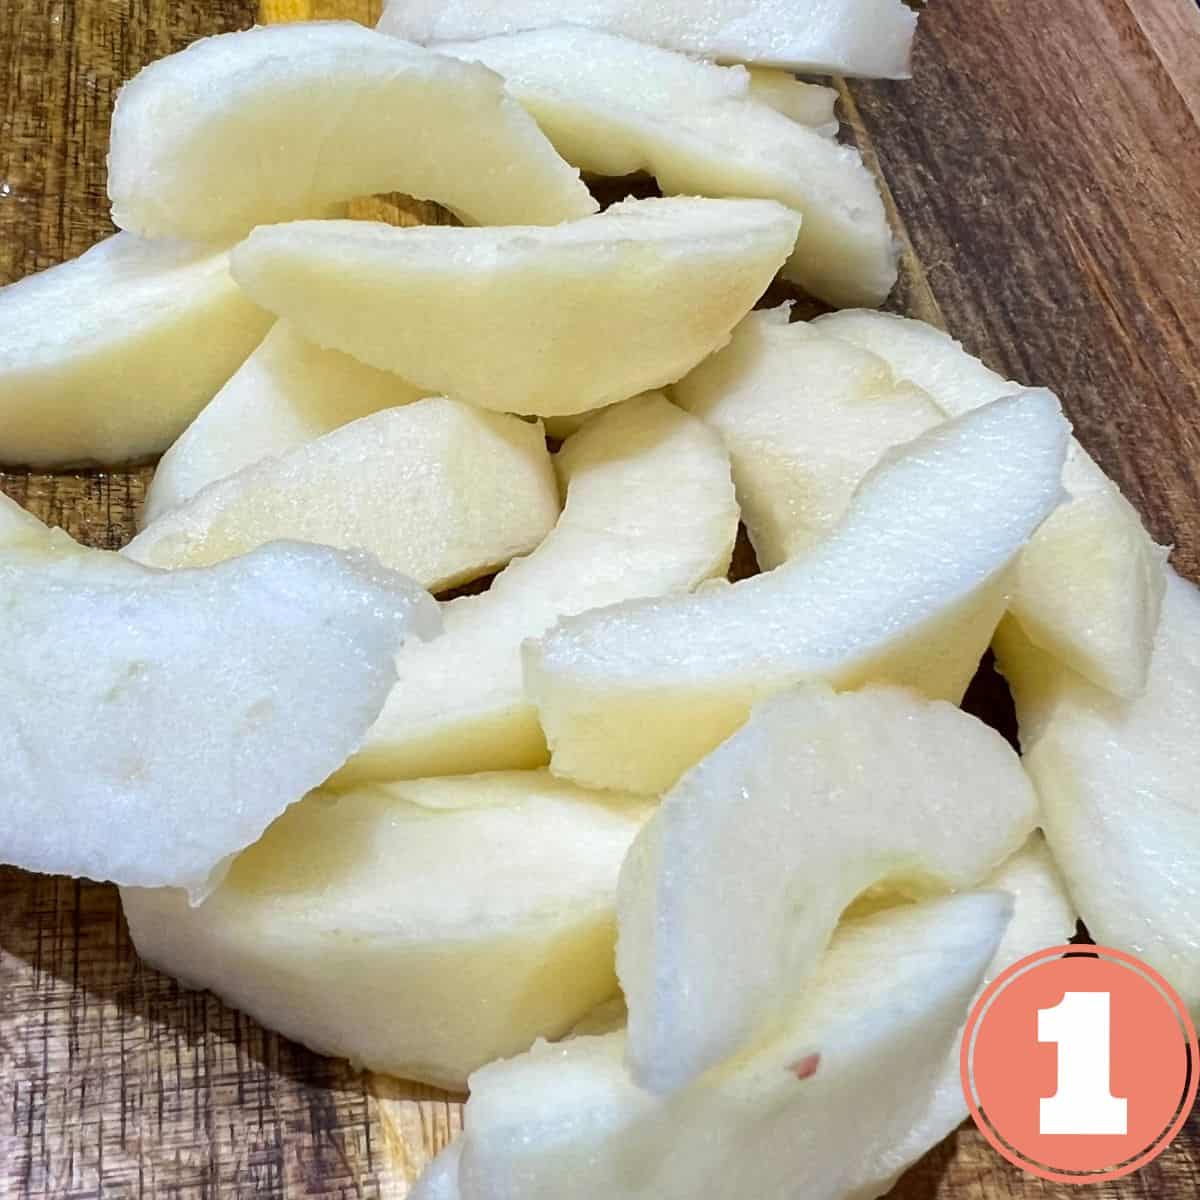 Peeled apple wedges on a cutting board